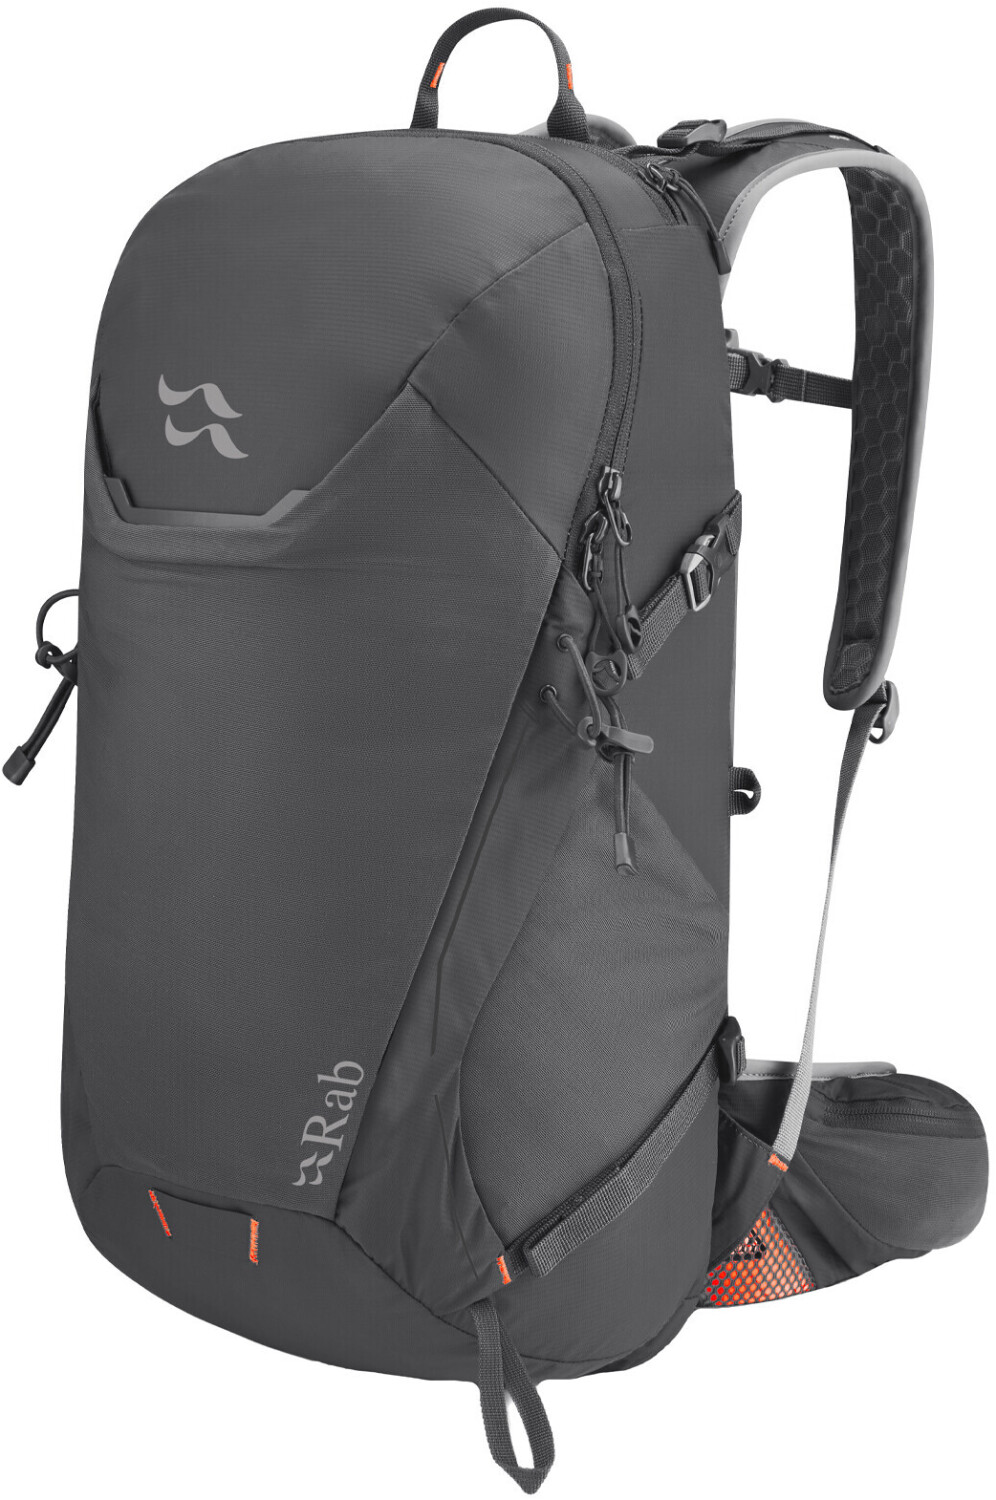 Photos - Backpack Rab Aeon ND25 Anthracite 